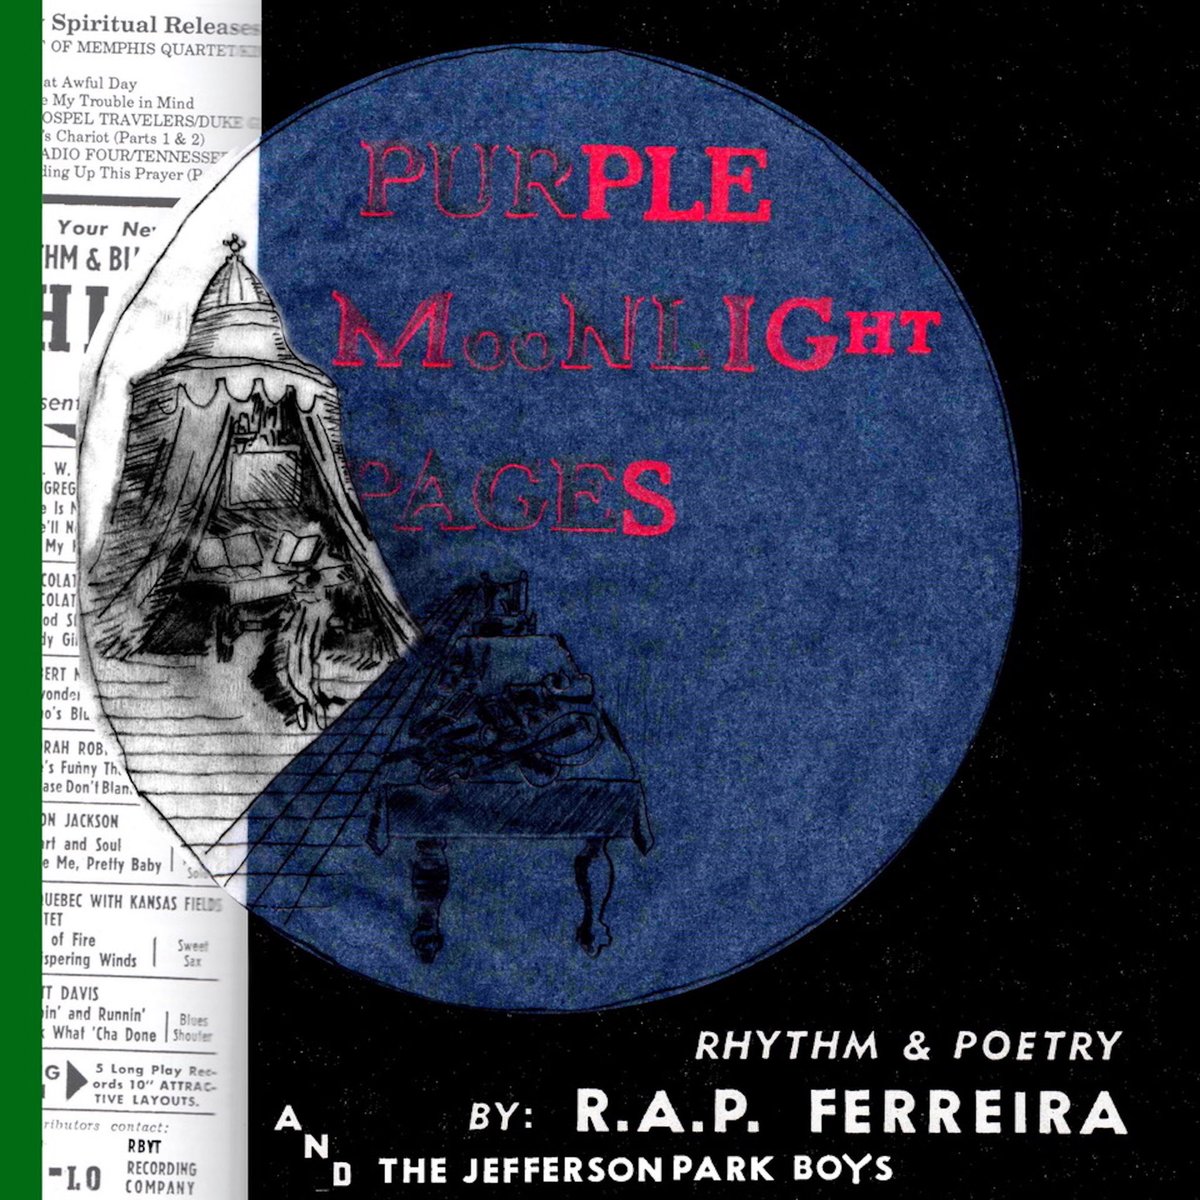 43. R.A.P. Ferreira - Purple Moonlight Pages (this record is just barely on the right side of too nerdy for jazz rap. A true backpack record, pretty far out in places, but a great headphone record)